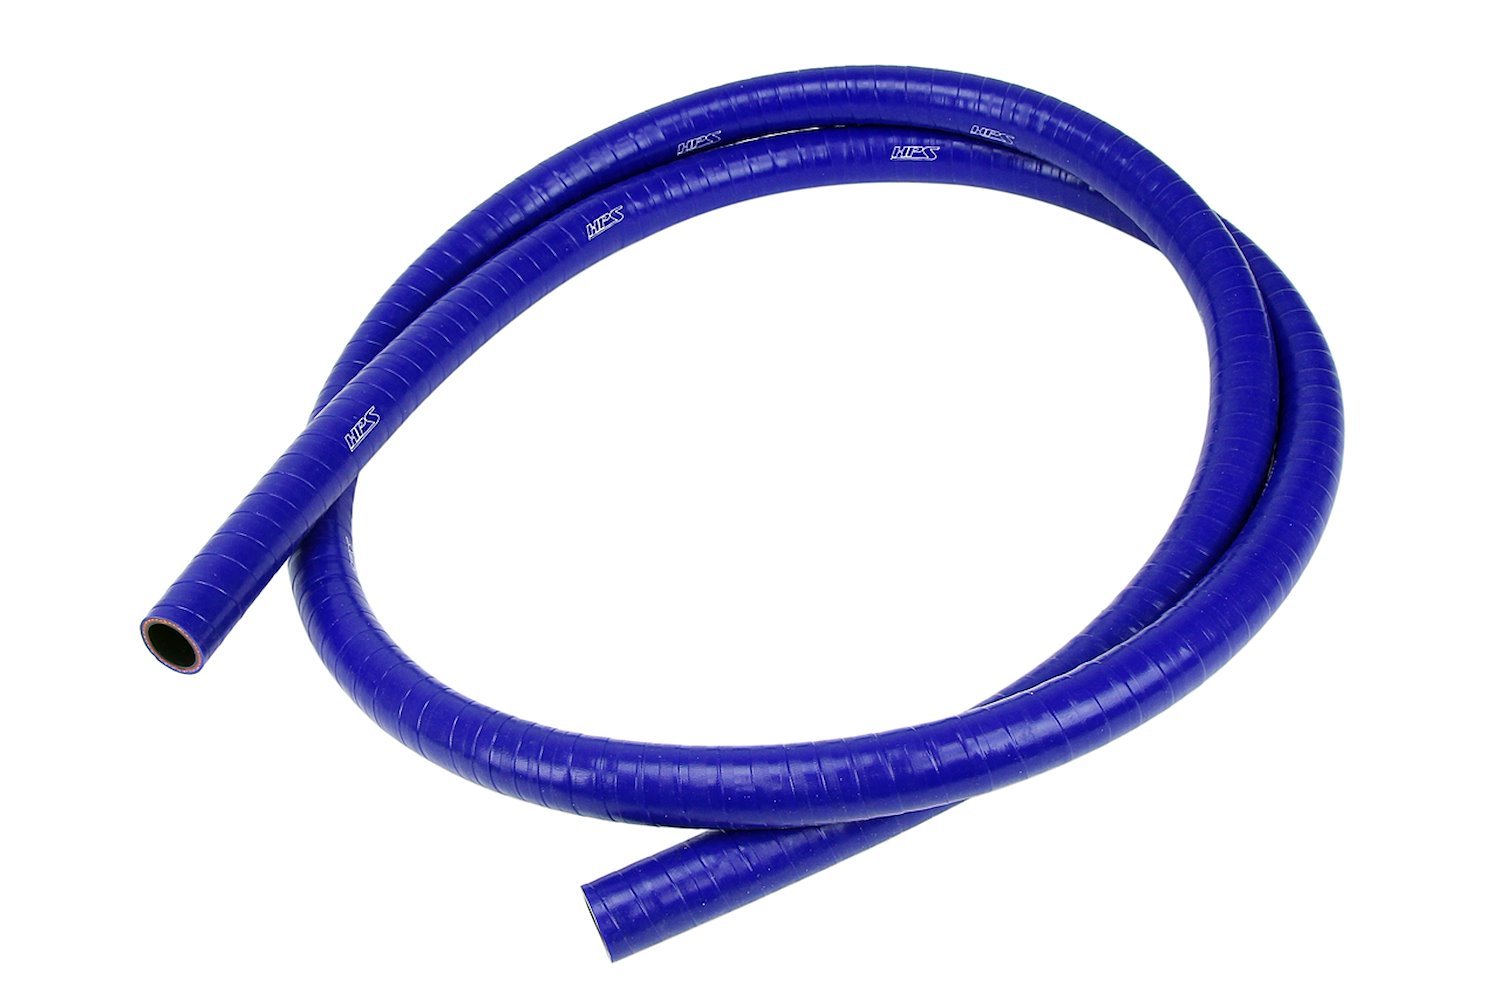 FKM-7F-075-BLUE FKM Silicone Hose, Silicone Oil Resistant Hose, High-Temp 1-Ply Reinforced, 3/4 in. ID, 7 ft. Long, Blue